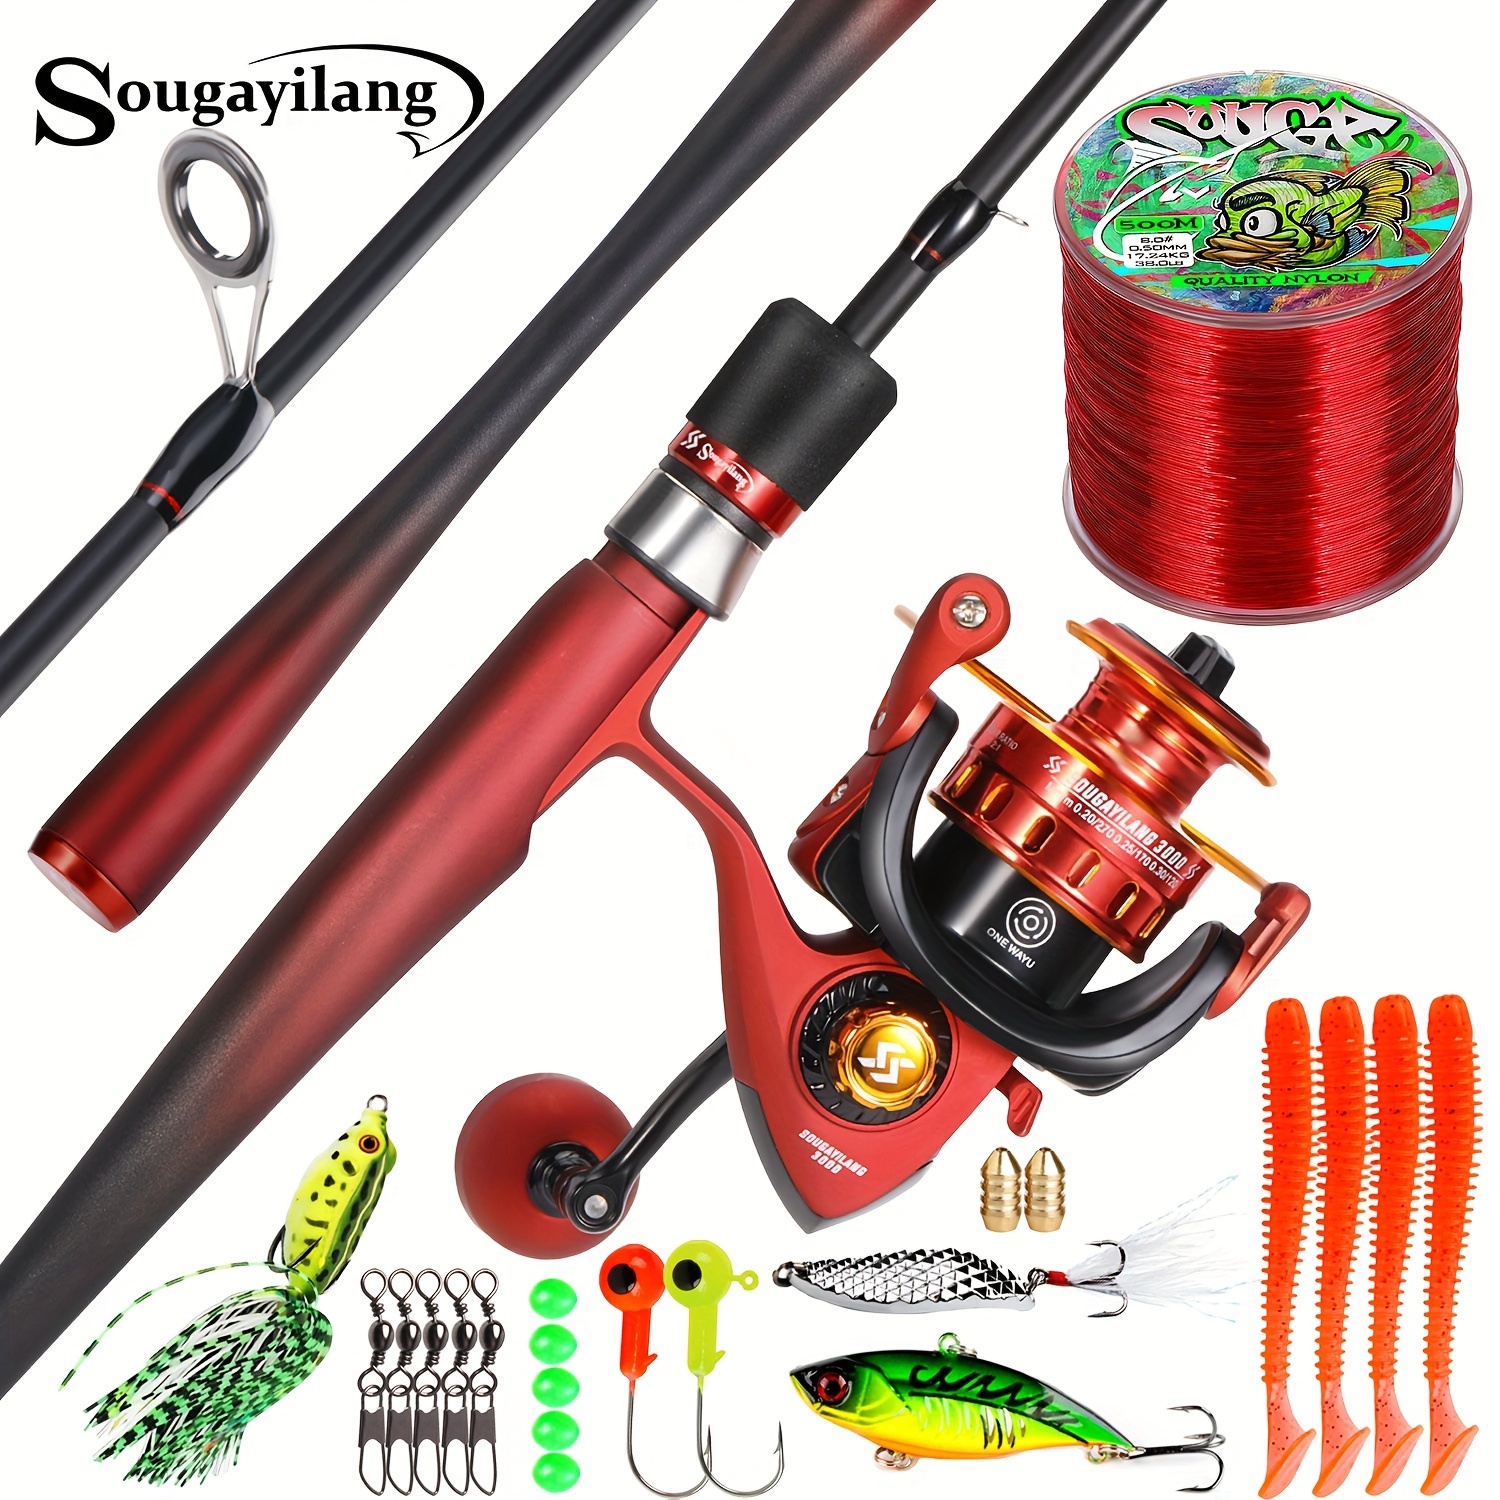 Sougayilang Spinning Fishing Combo, 2-section Ultralight Carbon Rod, 5.2:1  Gear Ratio Spinning Fishing Reel, 8-17 Lbs Max Drag, Fishing Set For Freshw